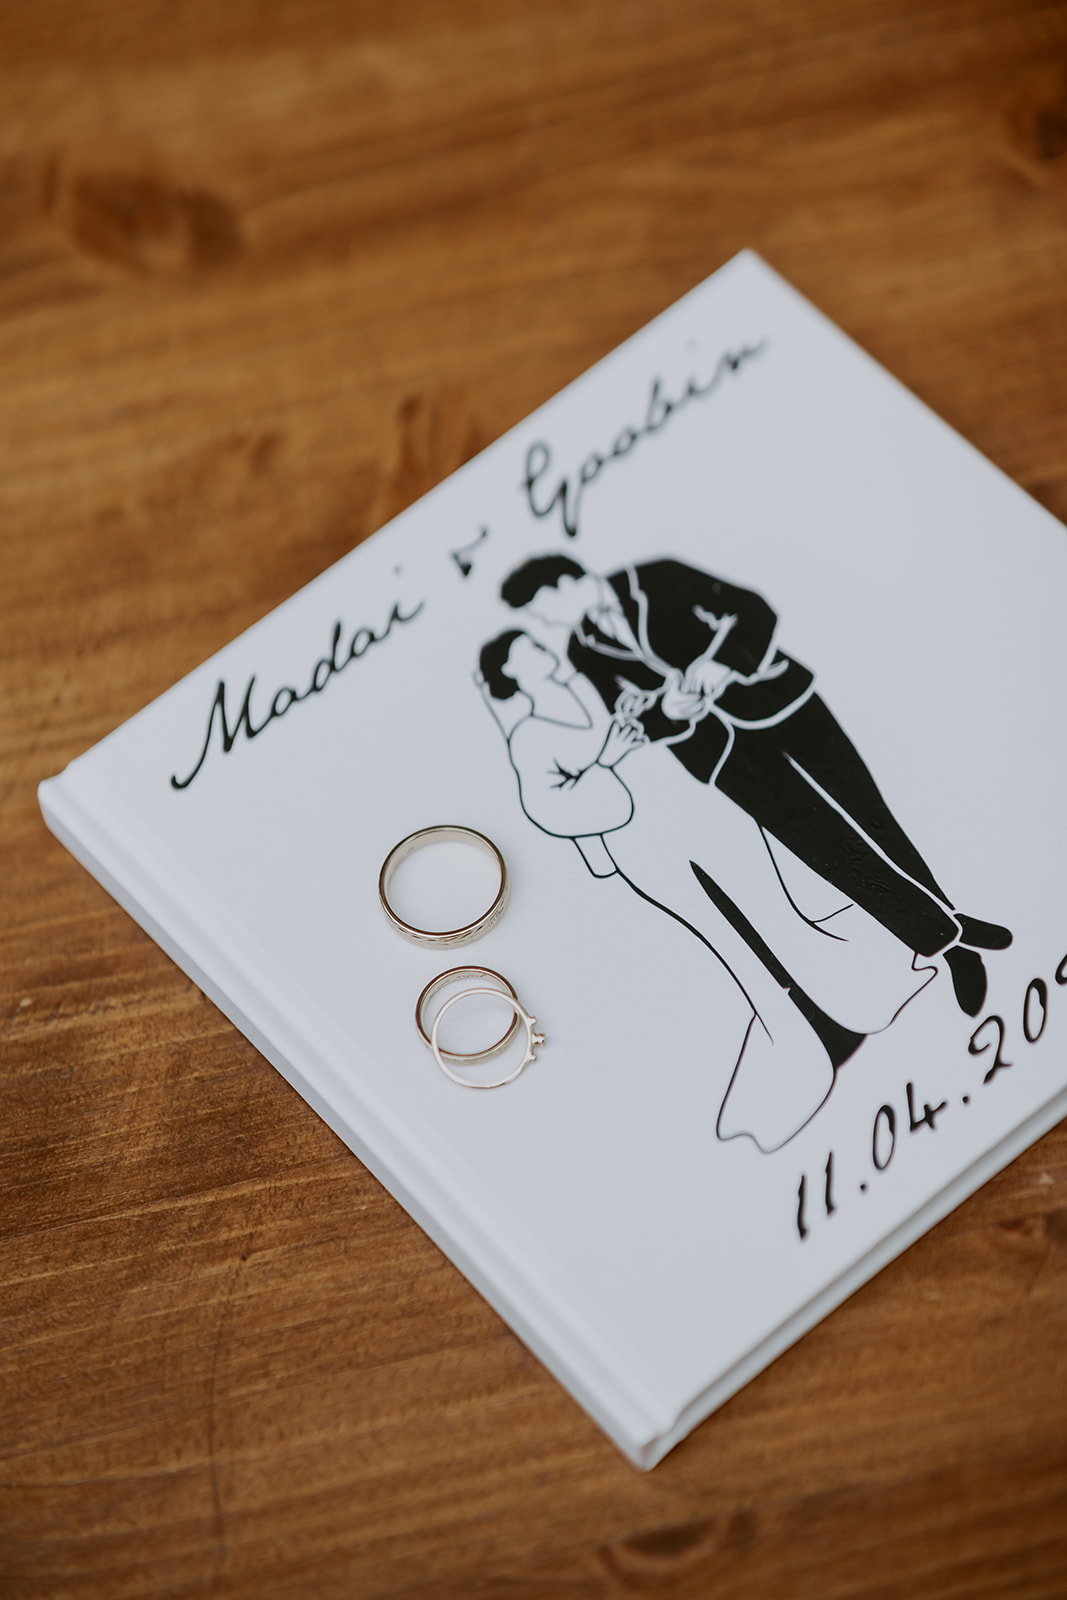 White wedding album featuring a black illustration of a couple dancing, with two rings on top and a date: 11.04.2023.